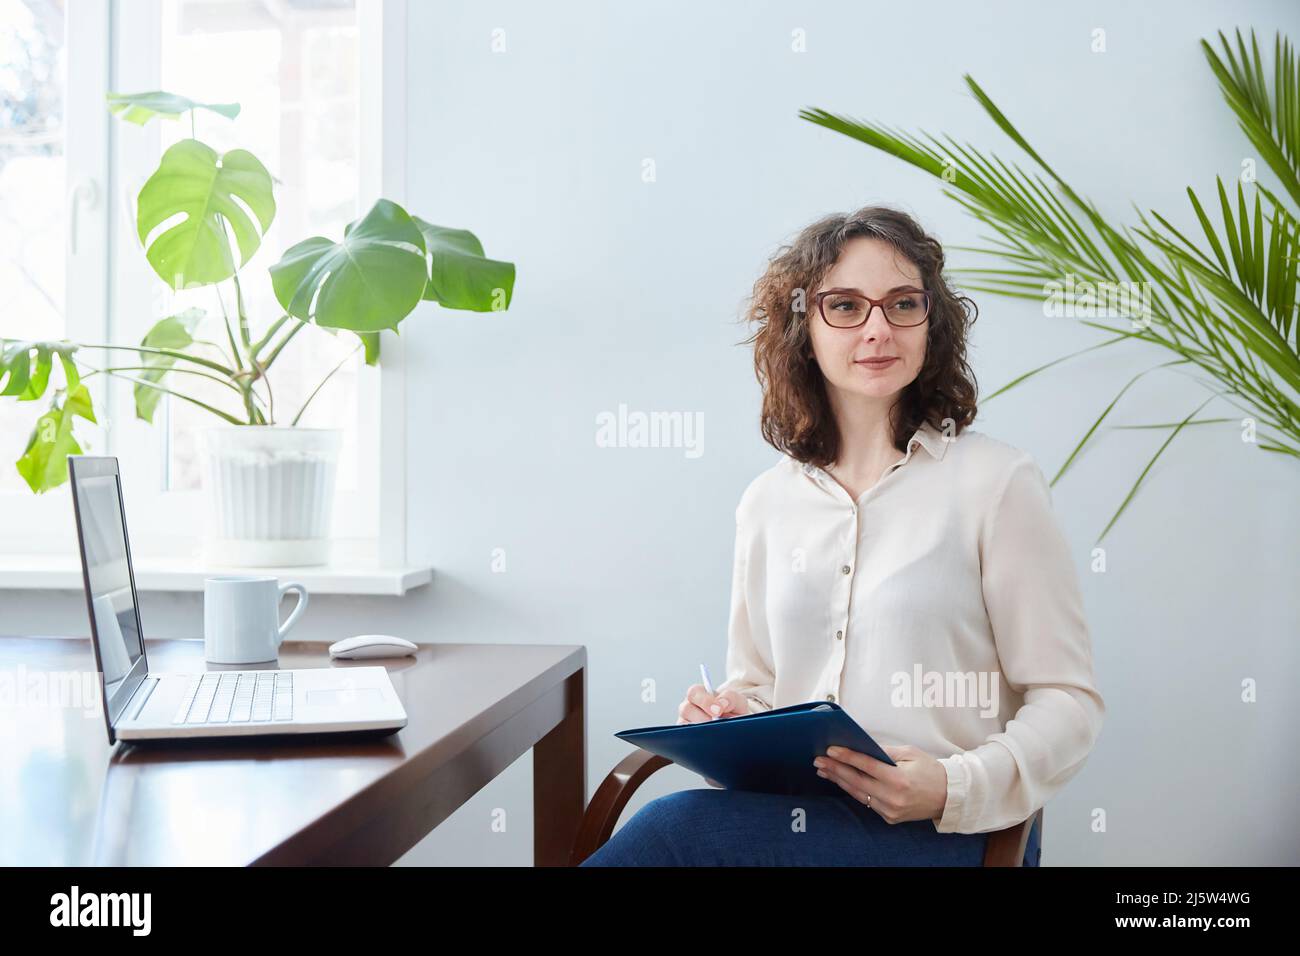 A female psychologist listens to a client and writes down information. Stock Photo